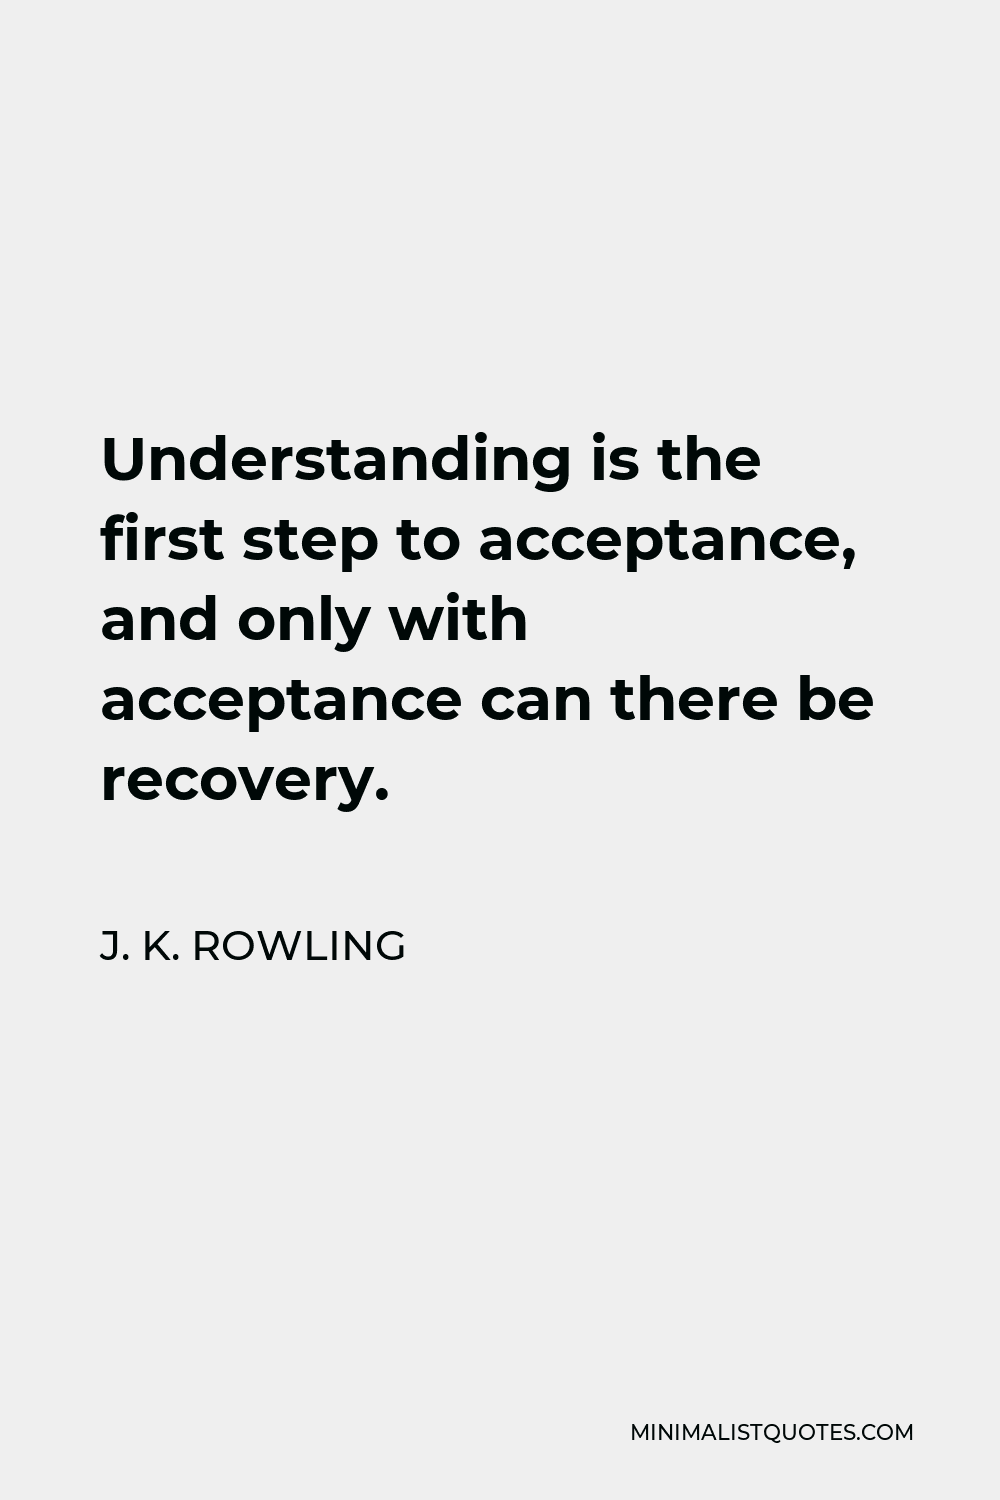 J. K. Rowling Quote - Understanding is the first step to acceptance, and only with acceptance can there be recovery.